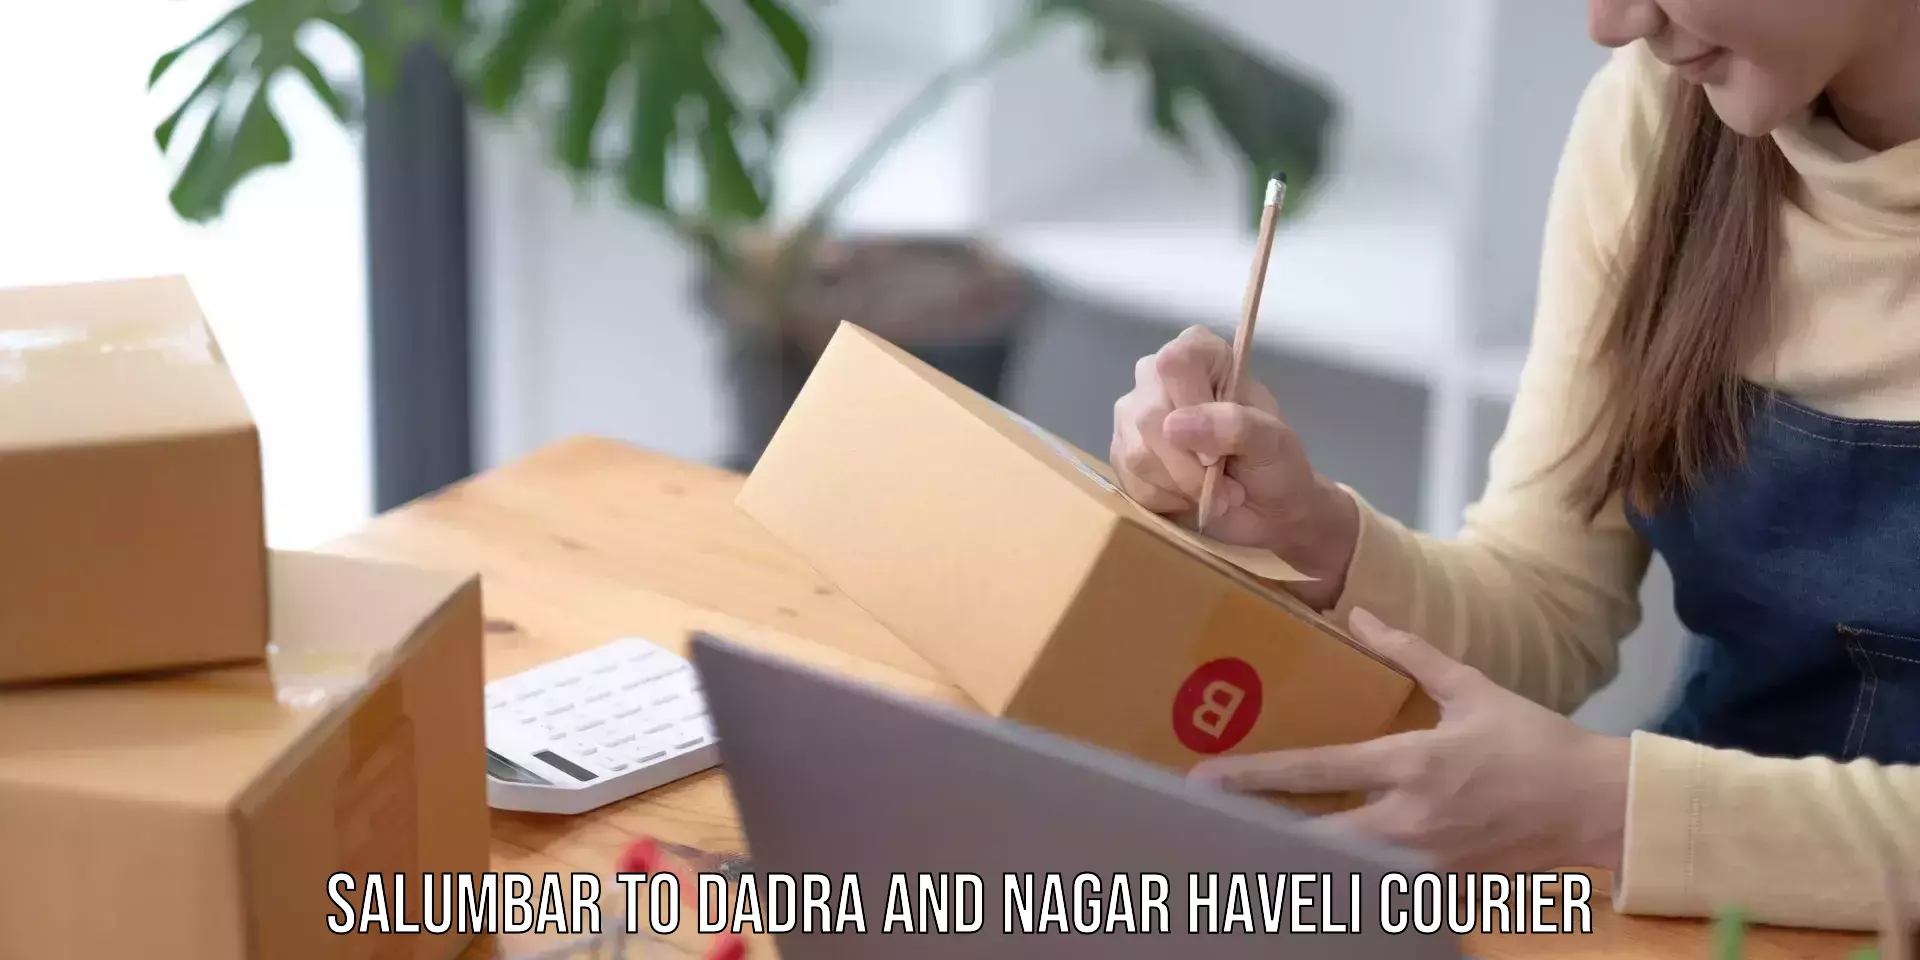 User-friendly delivery service Salumbar to Dadra and Nagar Haveli